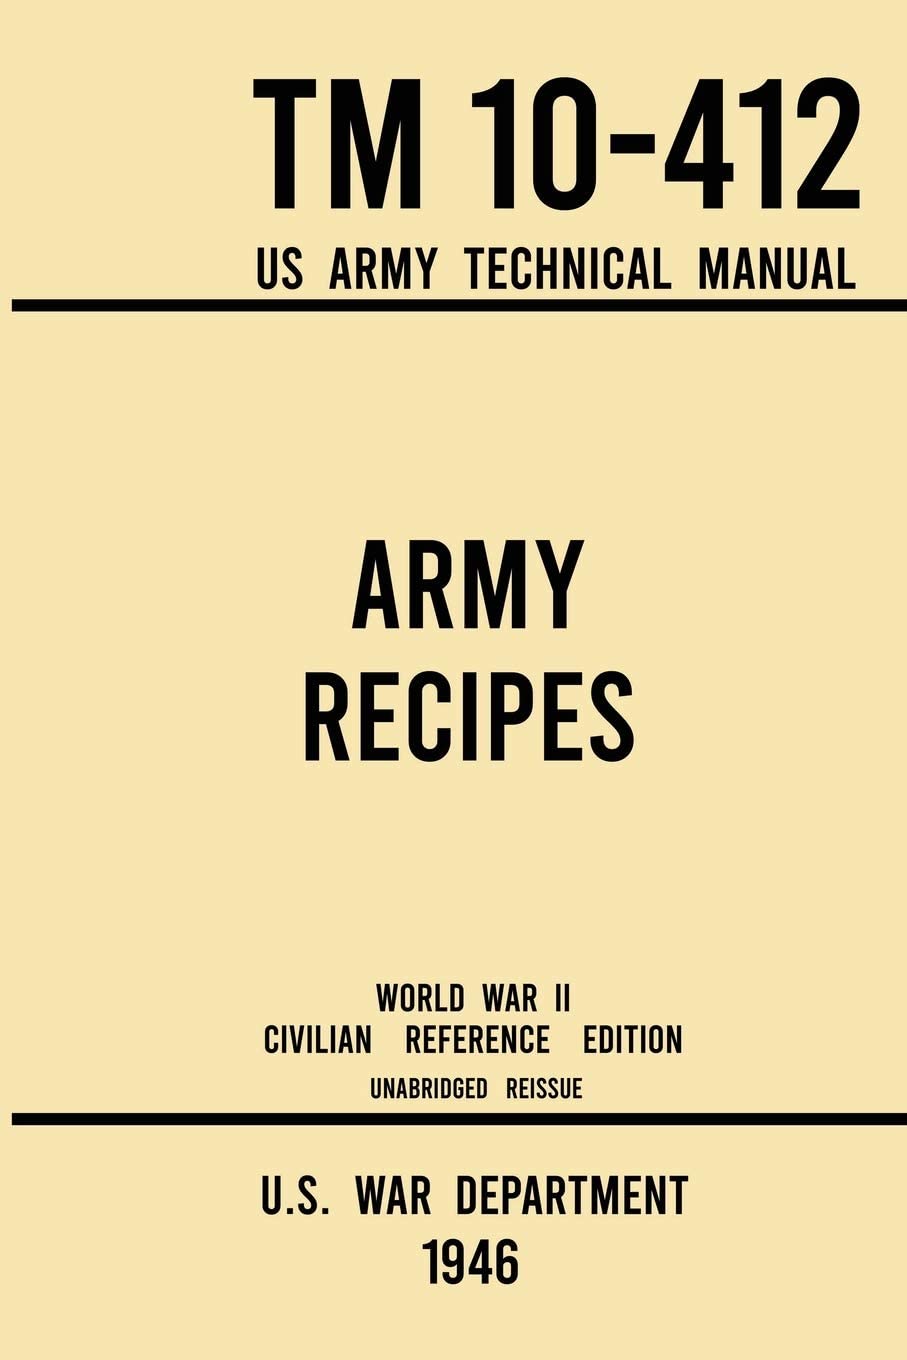 Army Recipes - TM 10-412 US Army Technical Manual (1946 World War II Civilian Reference Edition): The Unabridged Classic Wartime Cookbook for Large ... and Cafeterias (Military Outdoors Skills)